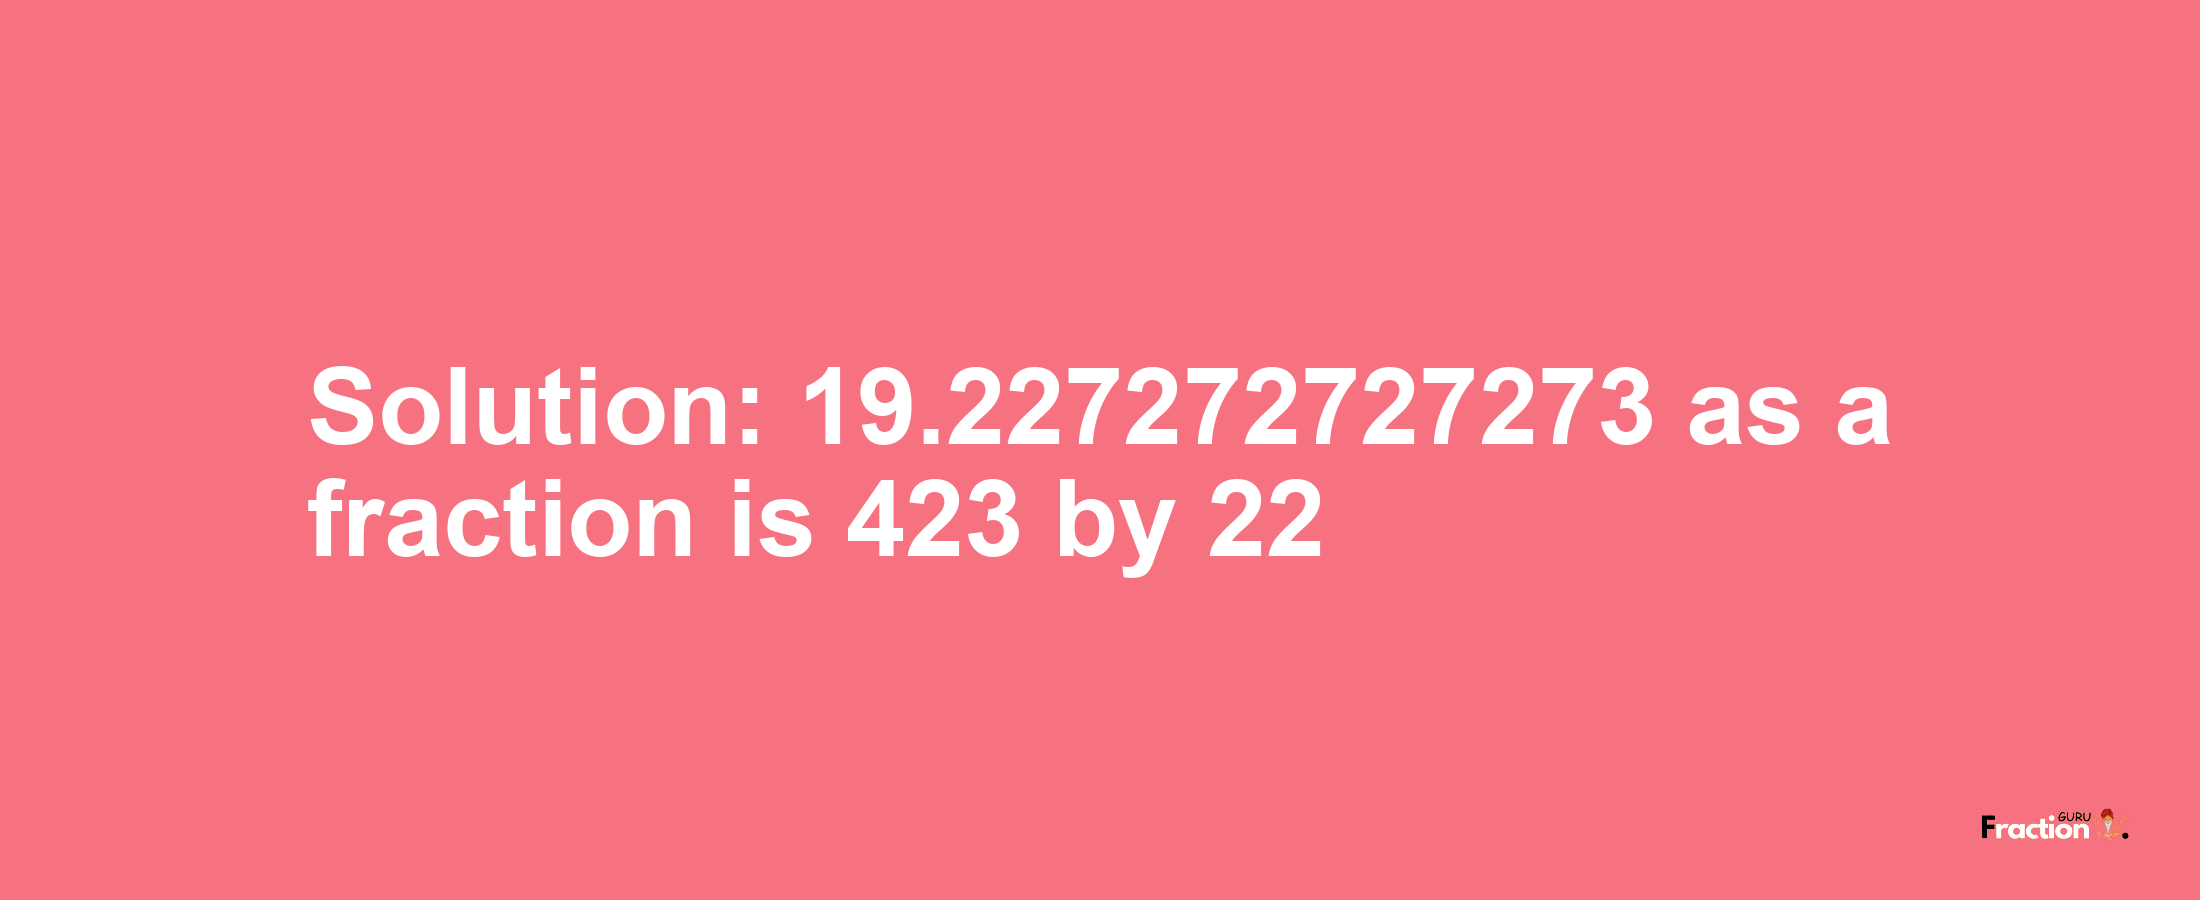 Solution:19.227272727273 as a fraction is 423/22